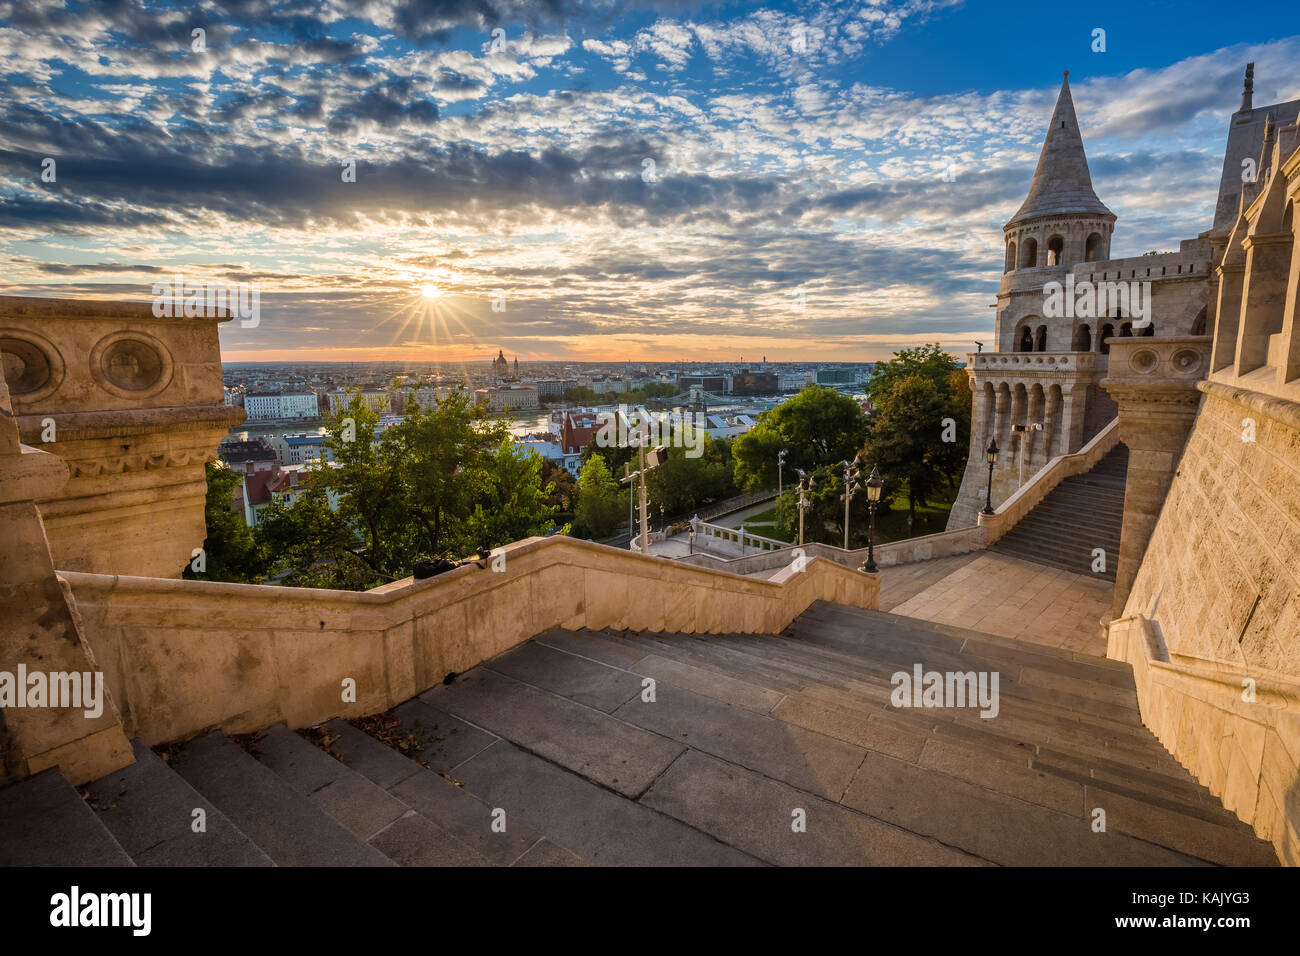 Budapest, Hungary - Staircase of the famous Fisherman Bastion on a beautiful sunny morning with sunrays and nice cloudy sky Stock Photo